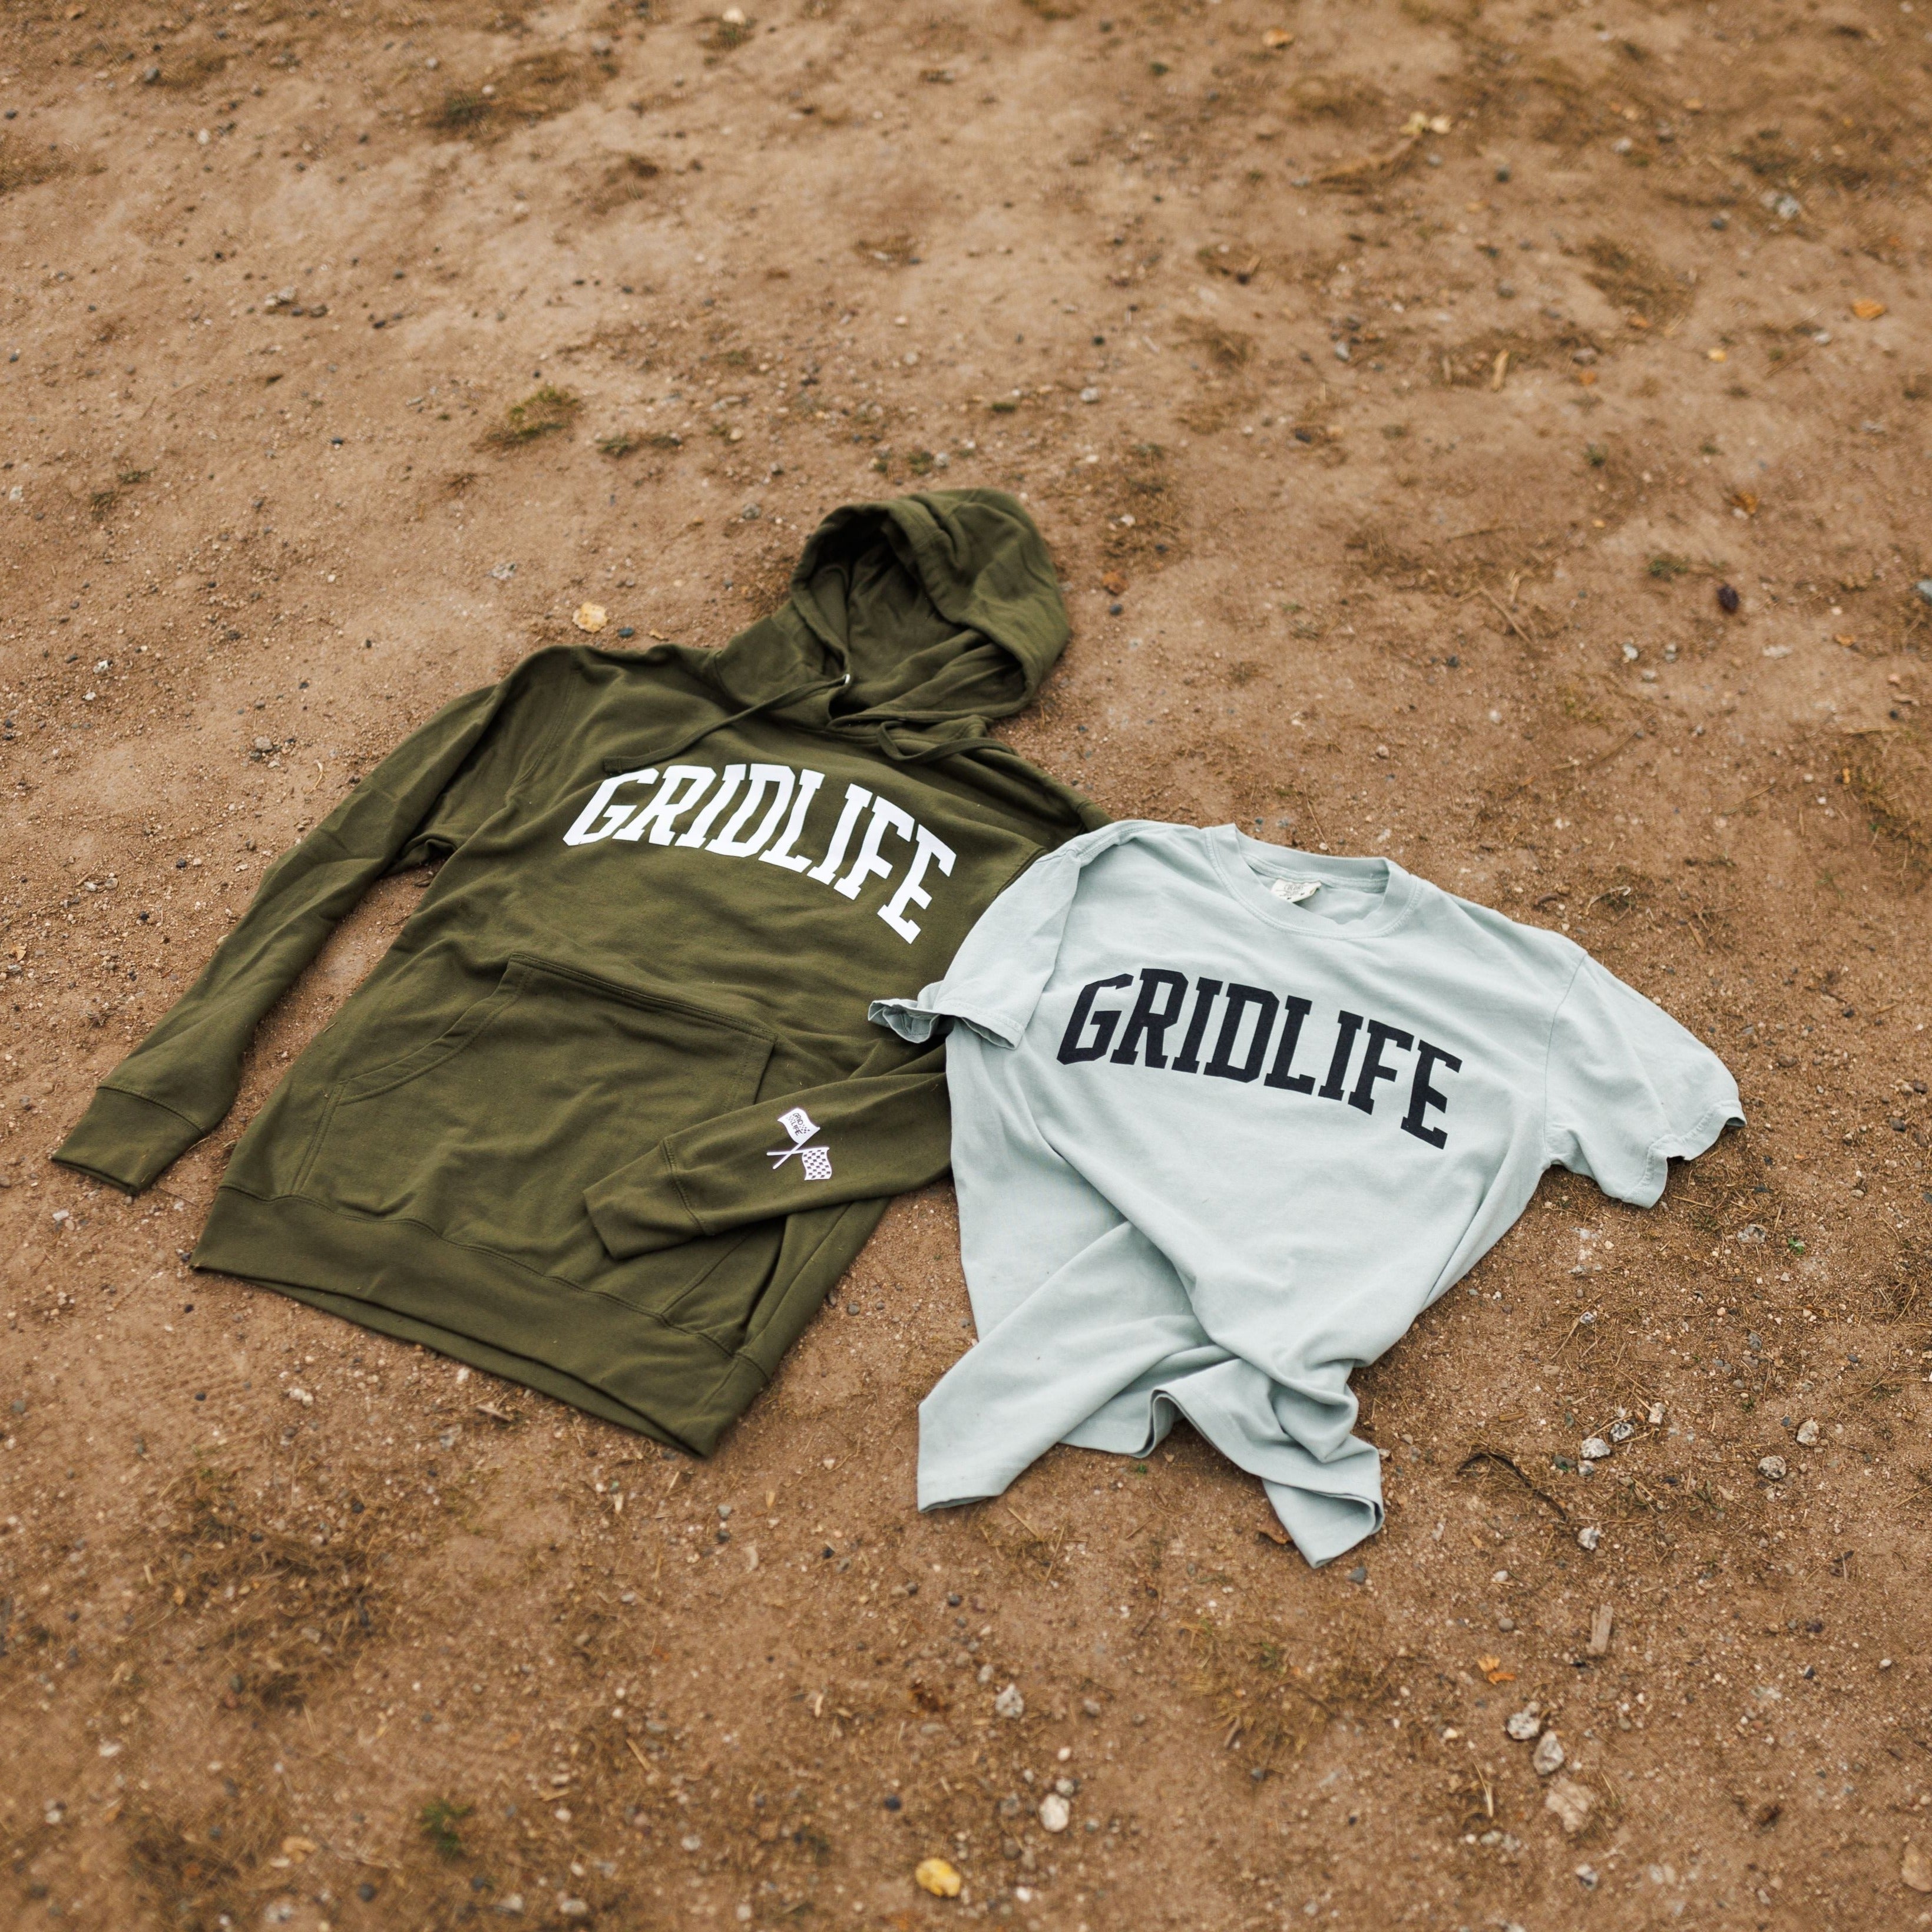 GRIDLIFE college style t-shirt and sweatshirt combo